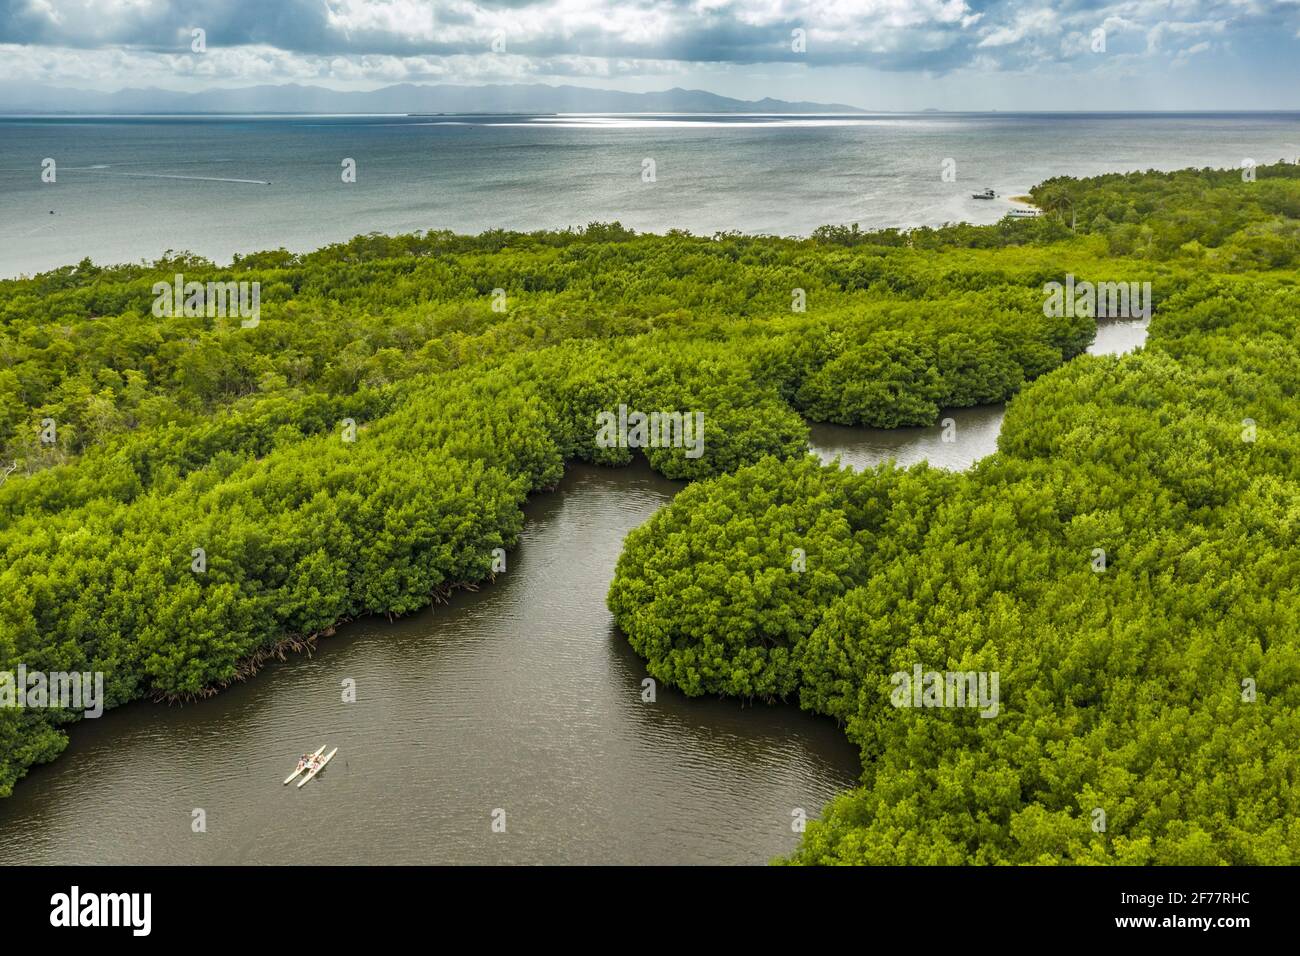 France, Caribbean, French West Indies, Guadeloupe, Grande-Terre,  Morne-à-l'Eau, Guadeloupe National Park, Grand Cul-de-Sac marin, Discovery  of the mangrove from Vieux-Bourg by sea bike, aerial view of the entrance  to the Gaschet river